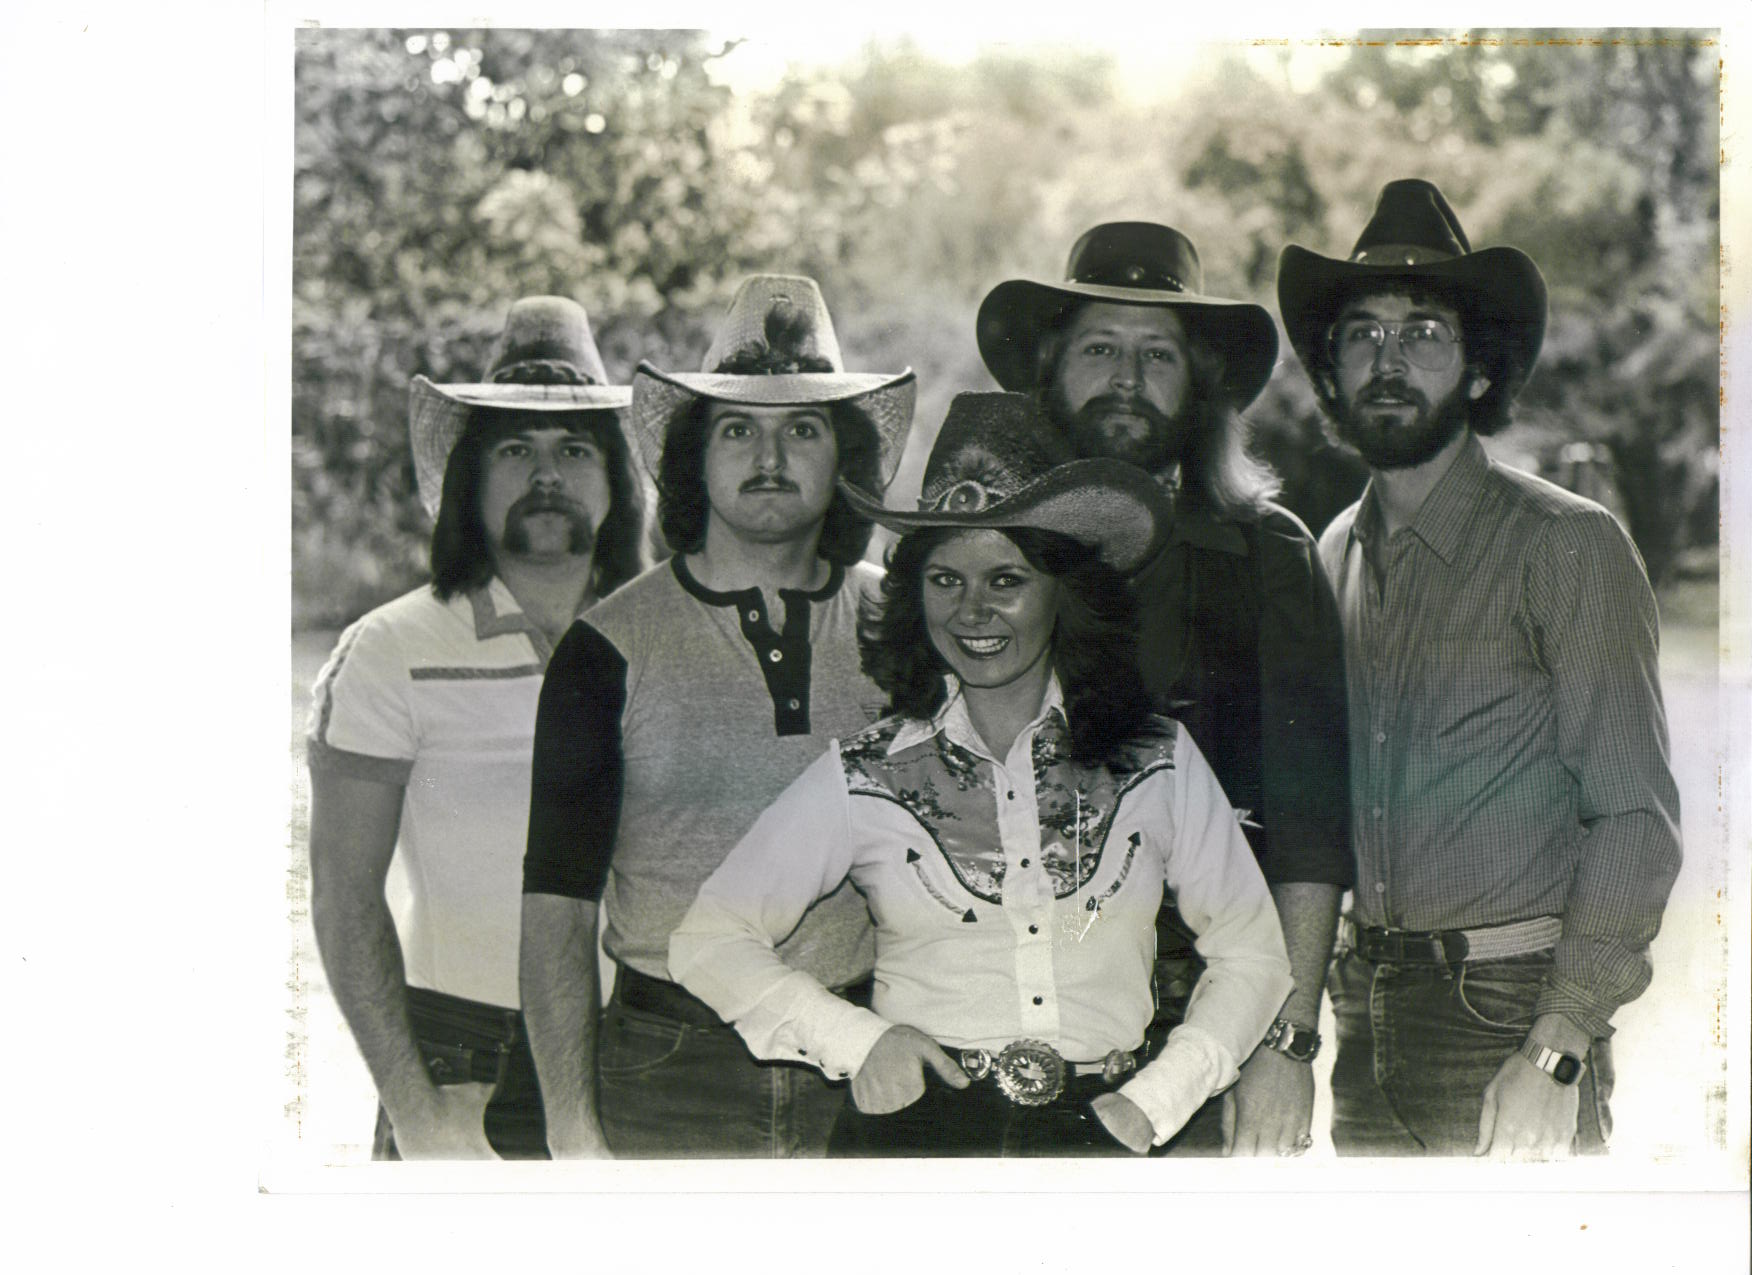 Miss Tammy Jean and The California Express. Russ Paul, Dennis Orr, Marty Rifkin, Sam Aiello and I